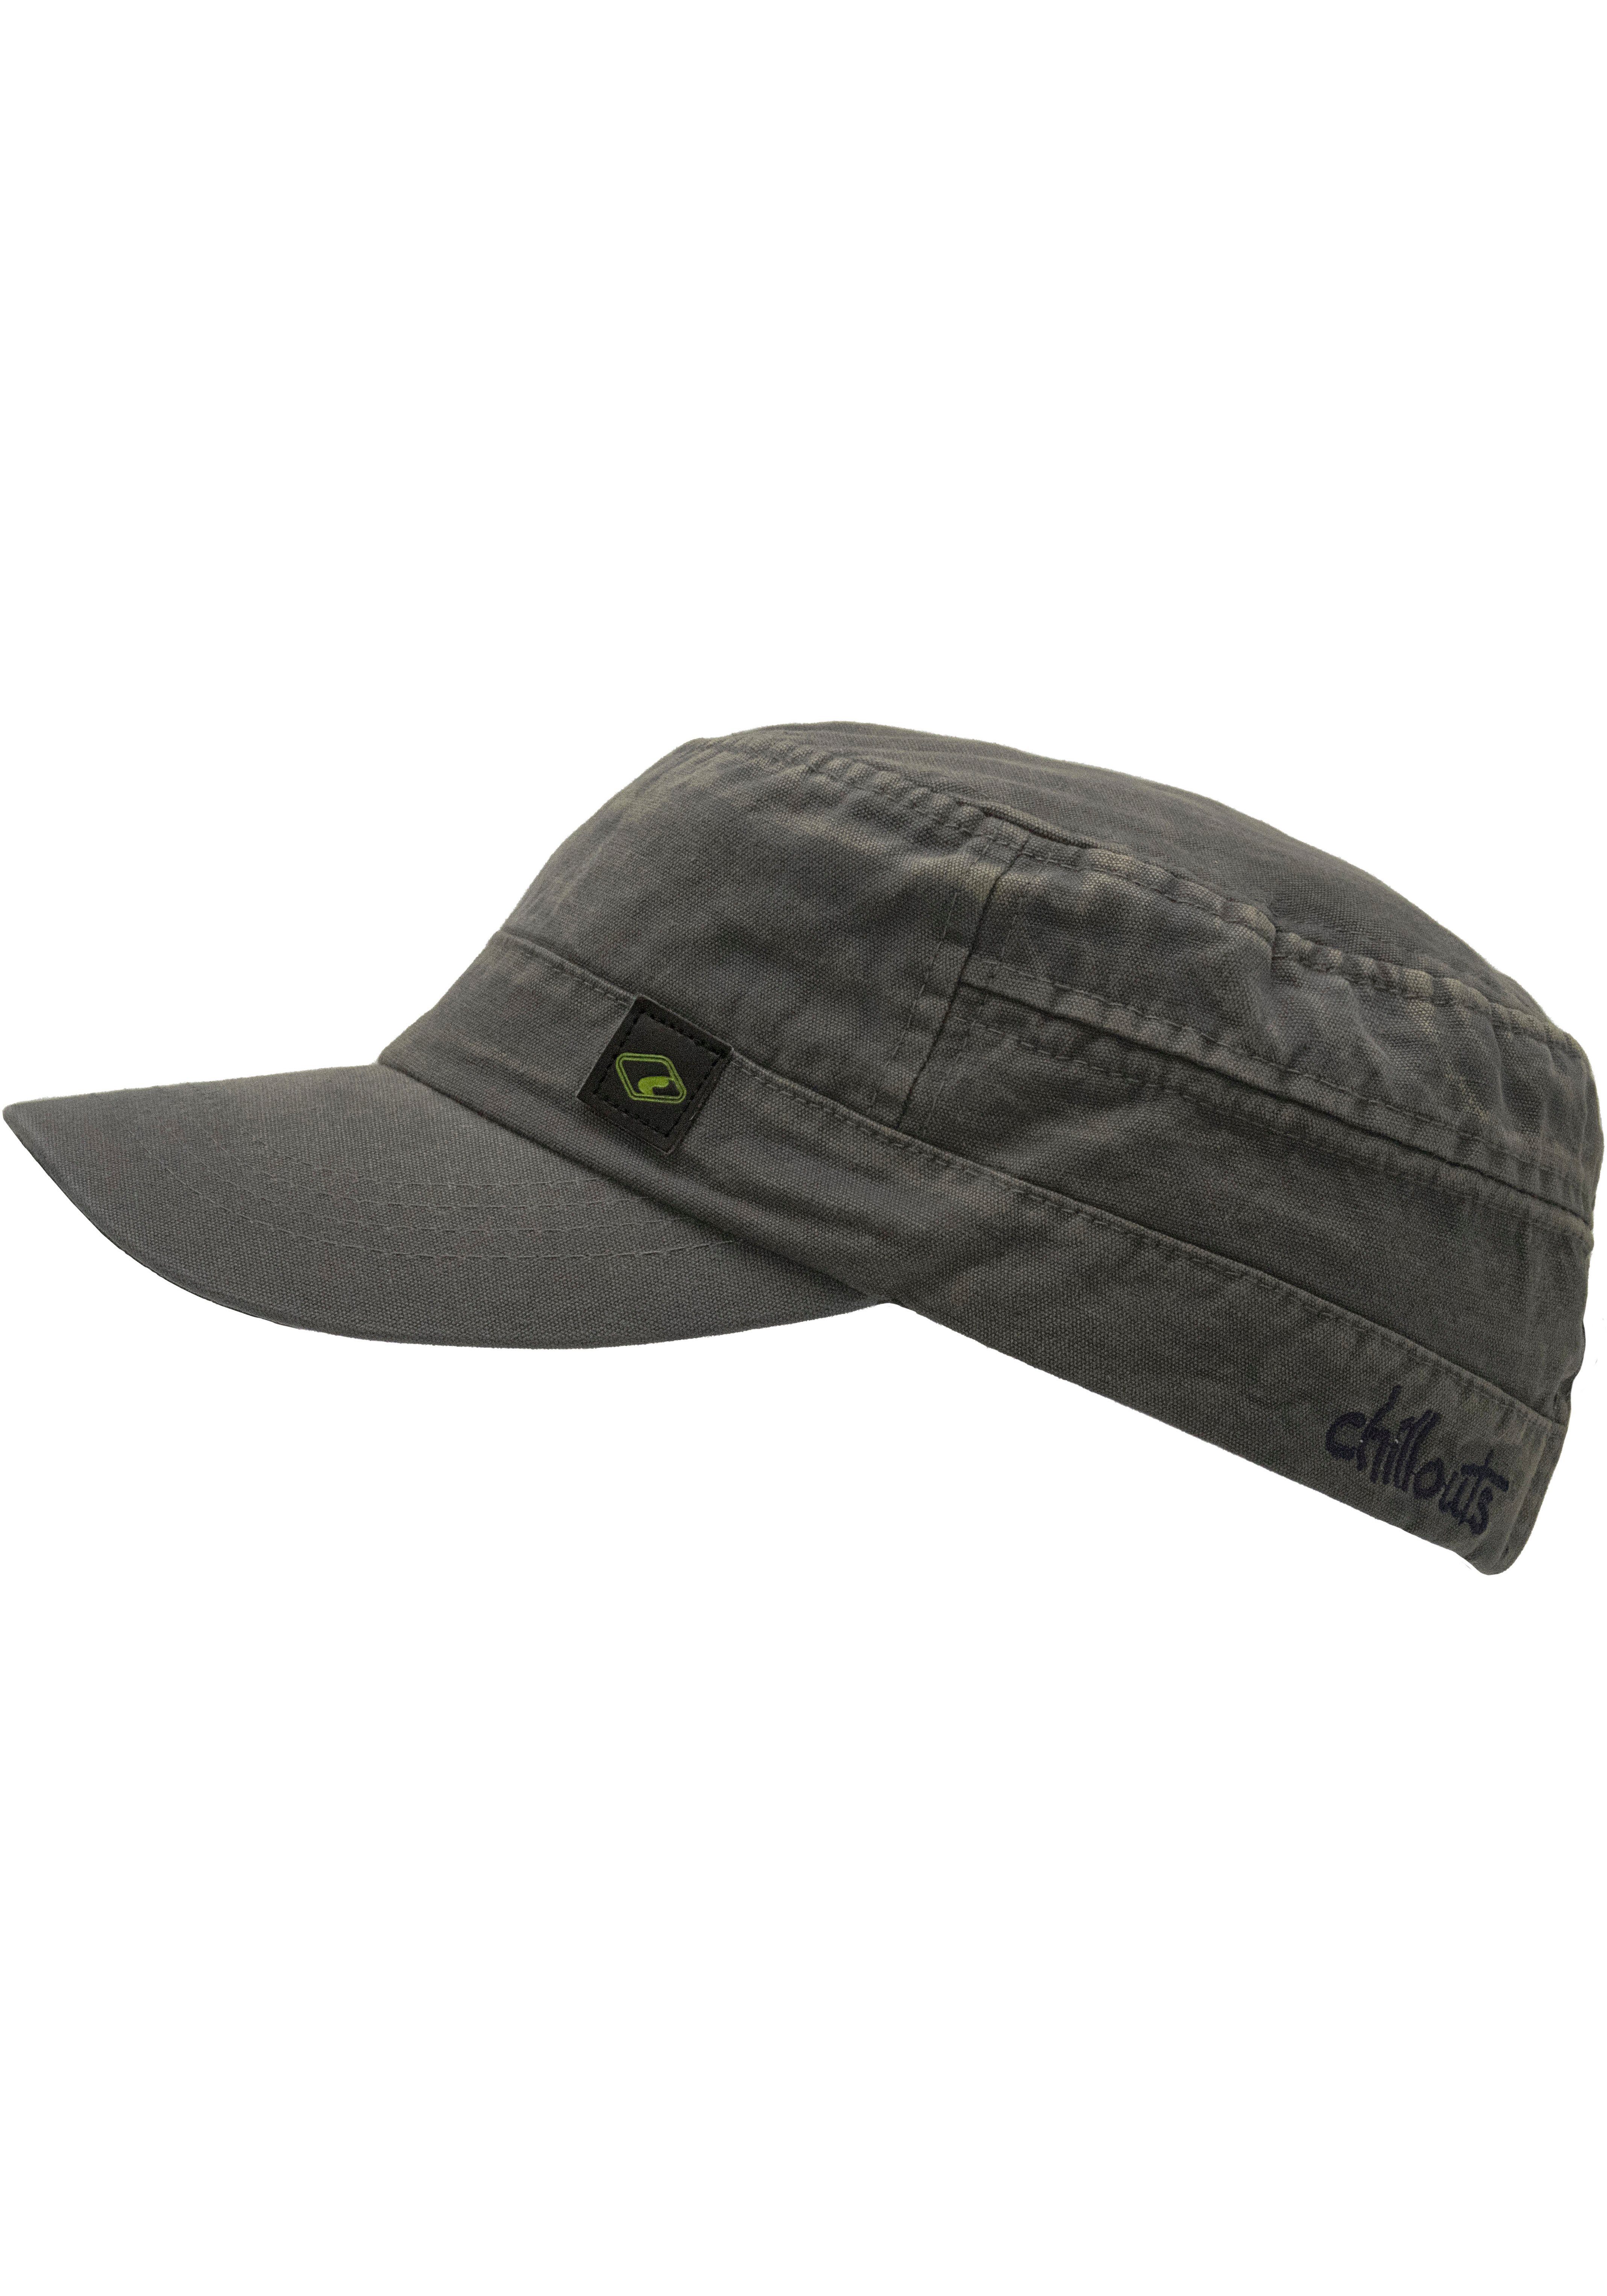 chillouts Army washed Hat grey reiner Size Paso El atmungsaktiv, Cap aus Baumwolle, One